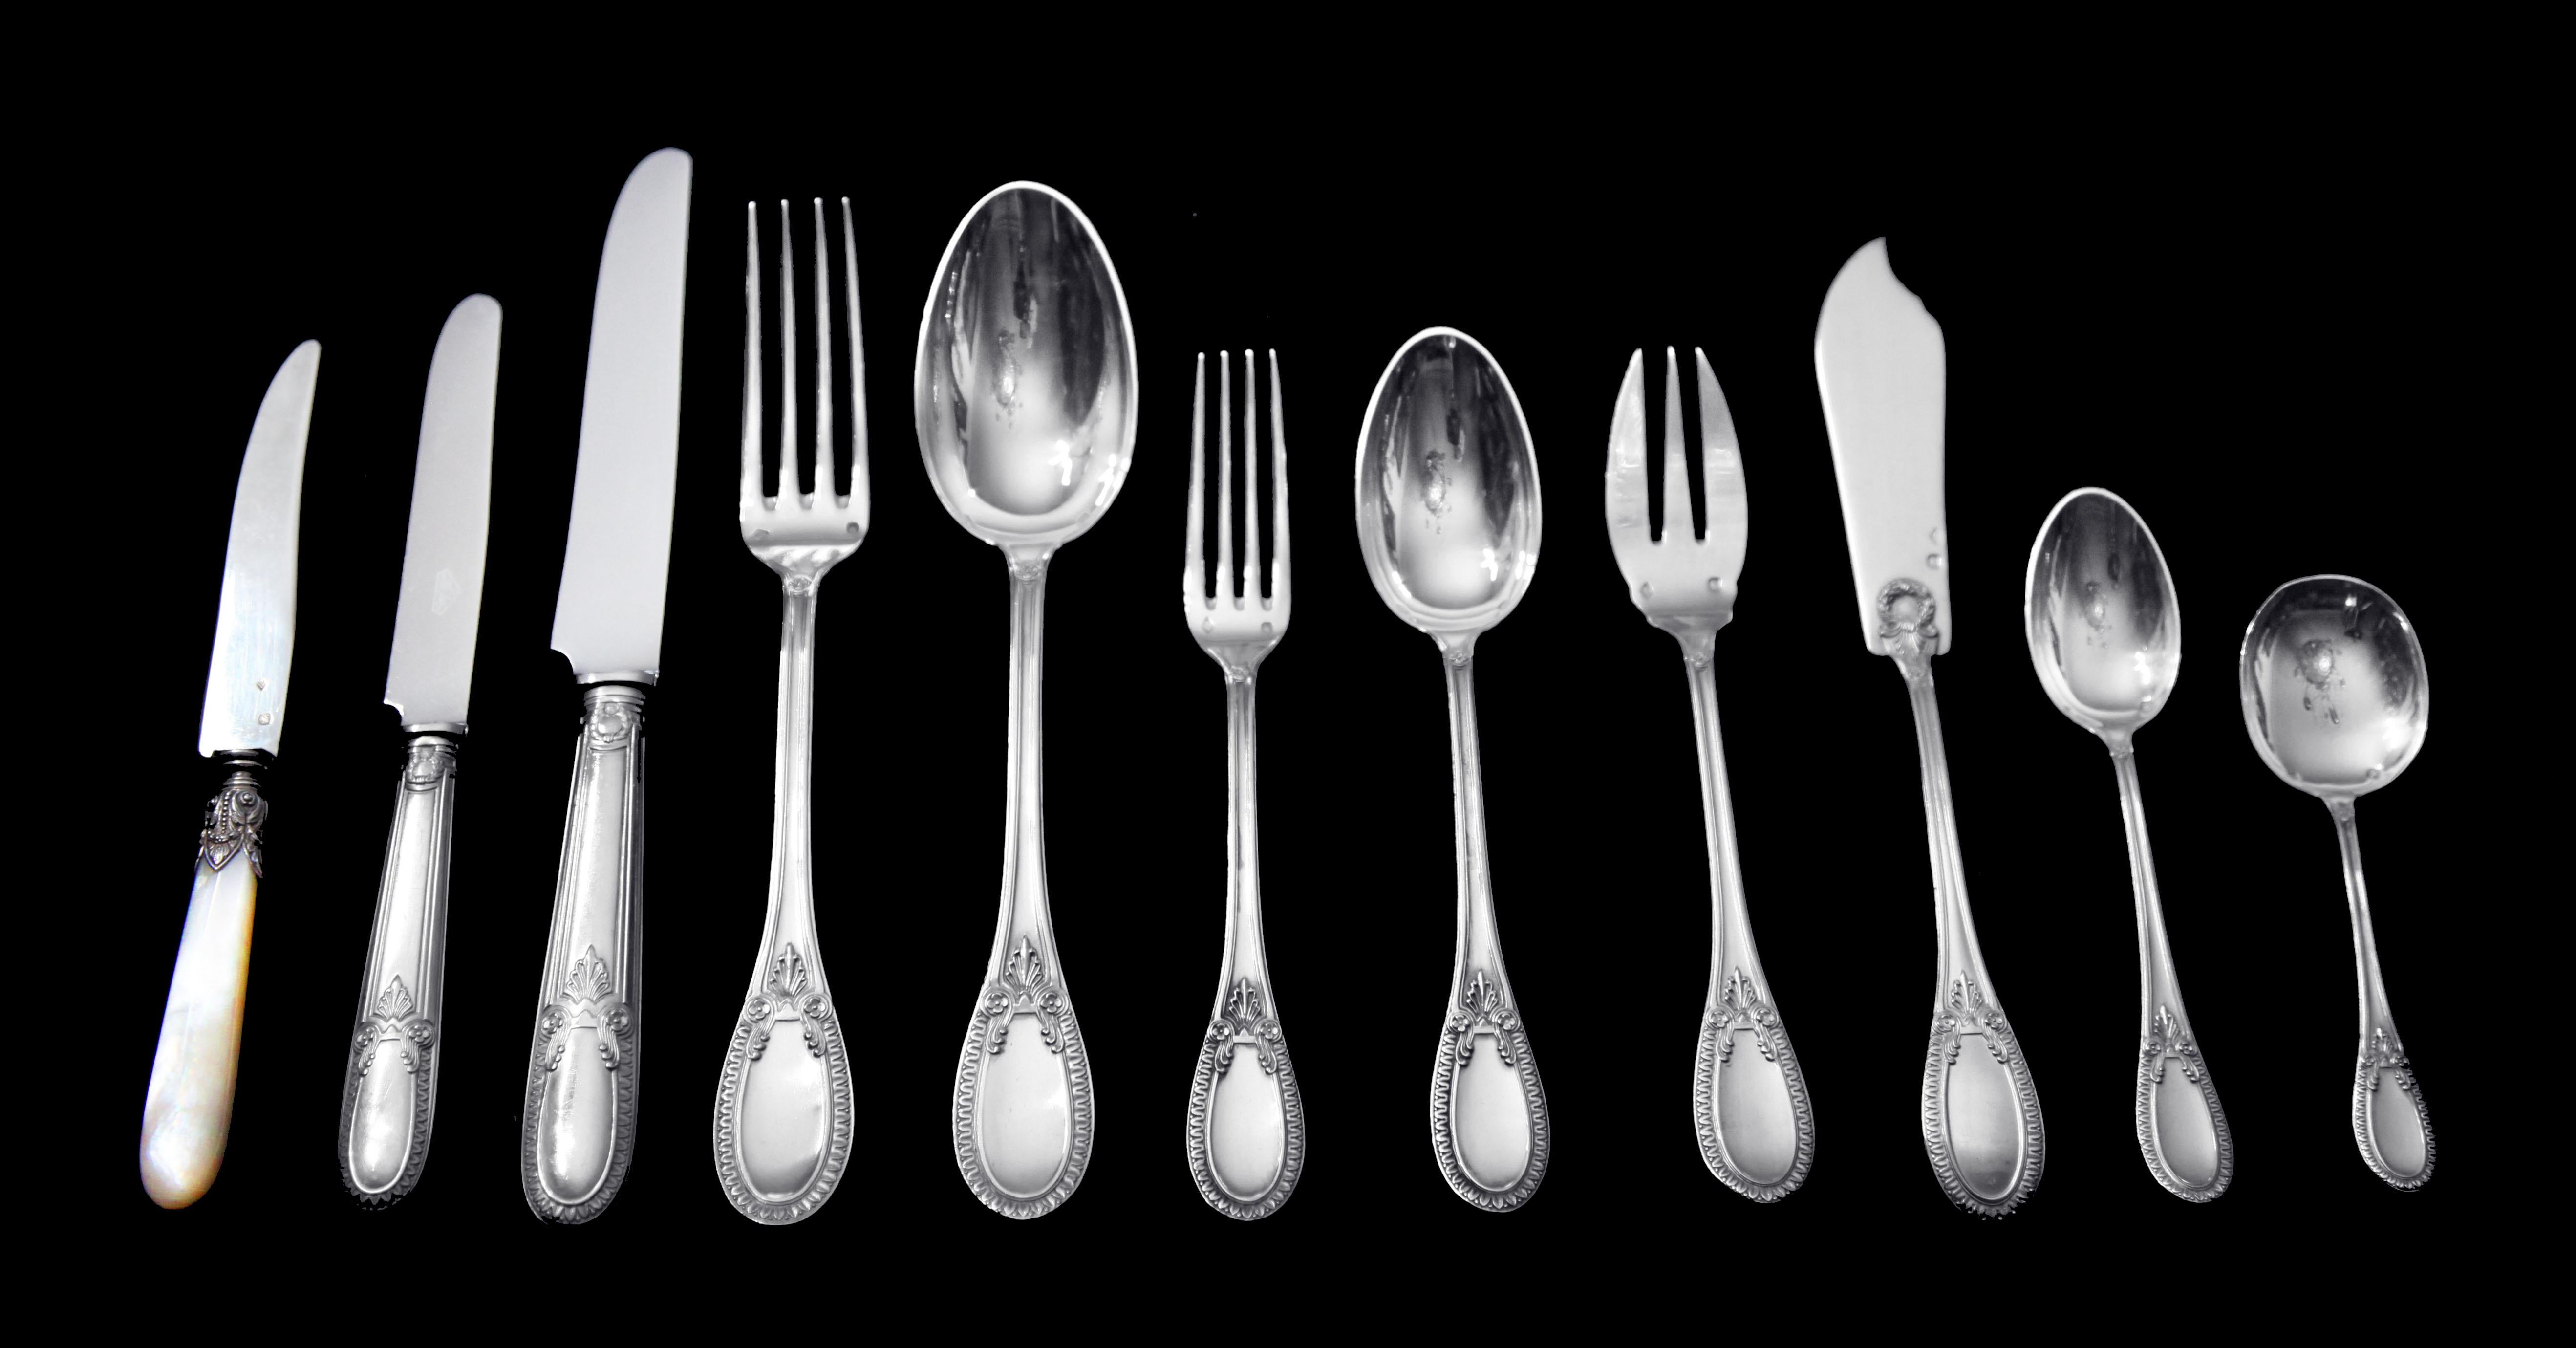 Direct from a Private Chateau in France, A Stunning 138pc. Privately Commissioned Louis XVI Sterling Silver Flatware Set (Service for 12) with 6 Serving Pieces by Internationally Known French Silversmiths 